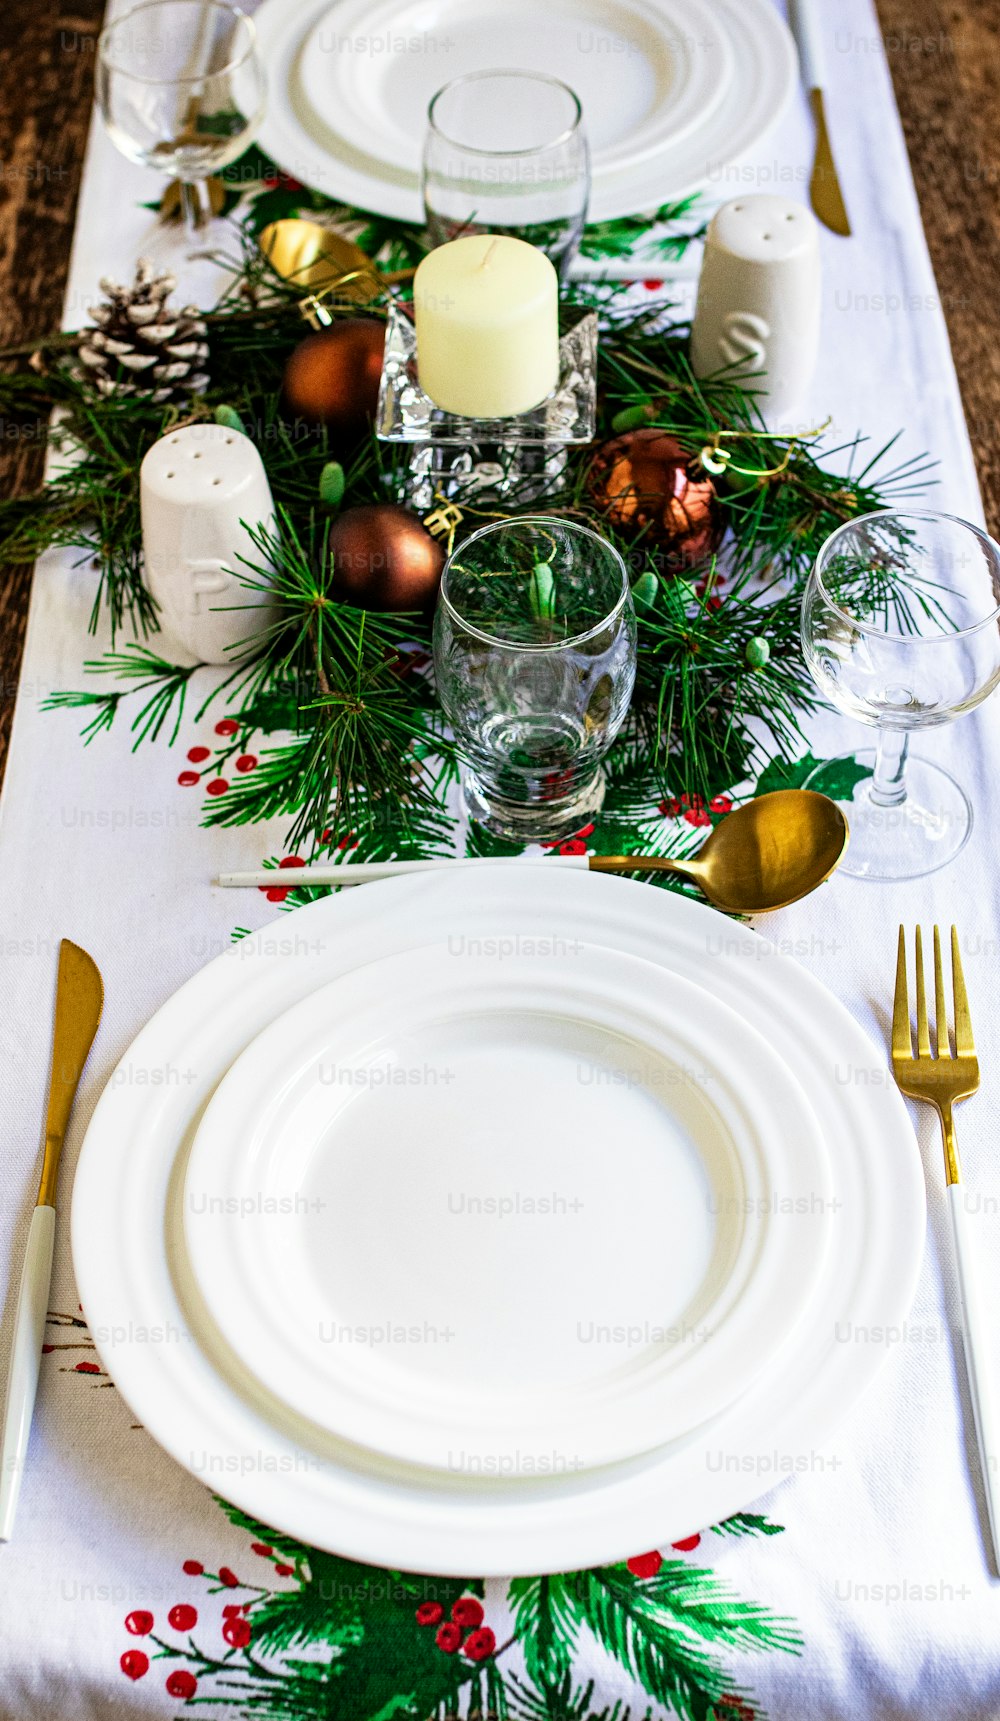 a table set for a holiday dinner with silverware and greenery